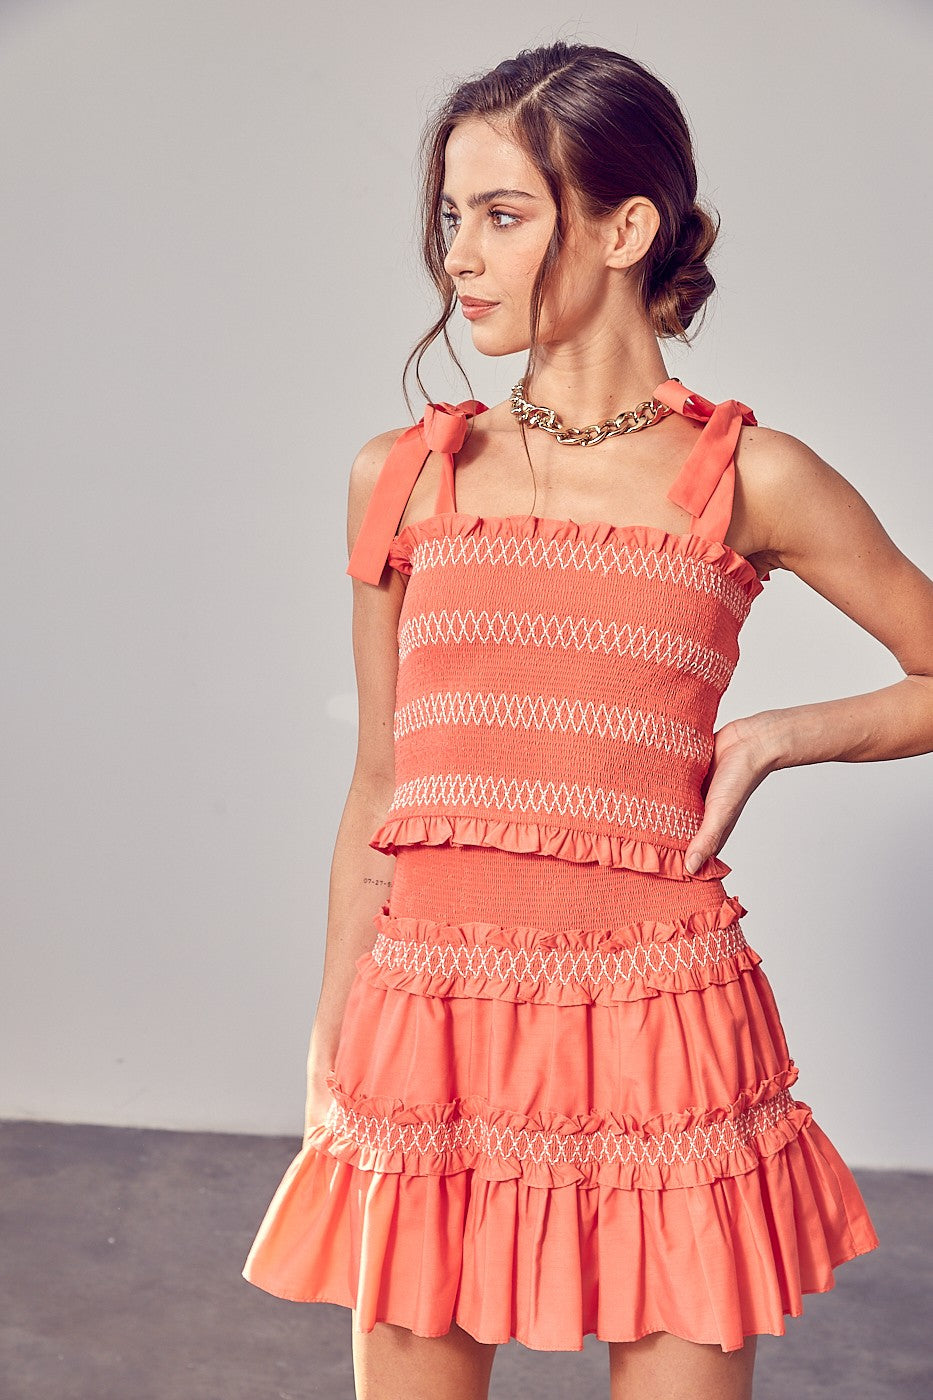 Add some serious charm and style into your wardrobe with the Coral  Smocked Bow Strap Top. Whether you rock it casually with jeans or match it up with the Coral Tiered Ruffle Skirt for a flirty edge, this top has got you covered.  Model is 5'9" and is wearing a size Small Bust: 32", Waist: 24", Hips: 34"